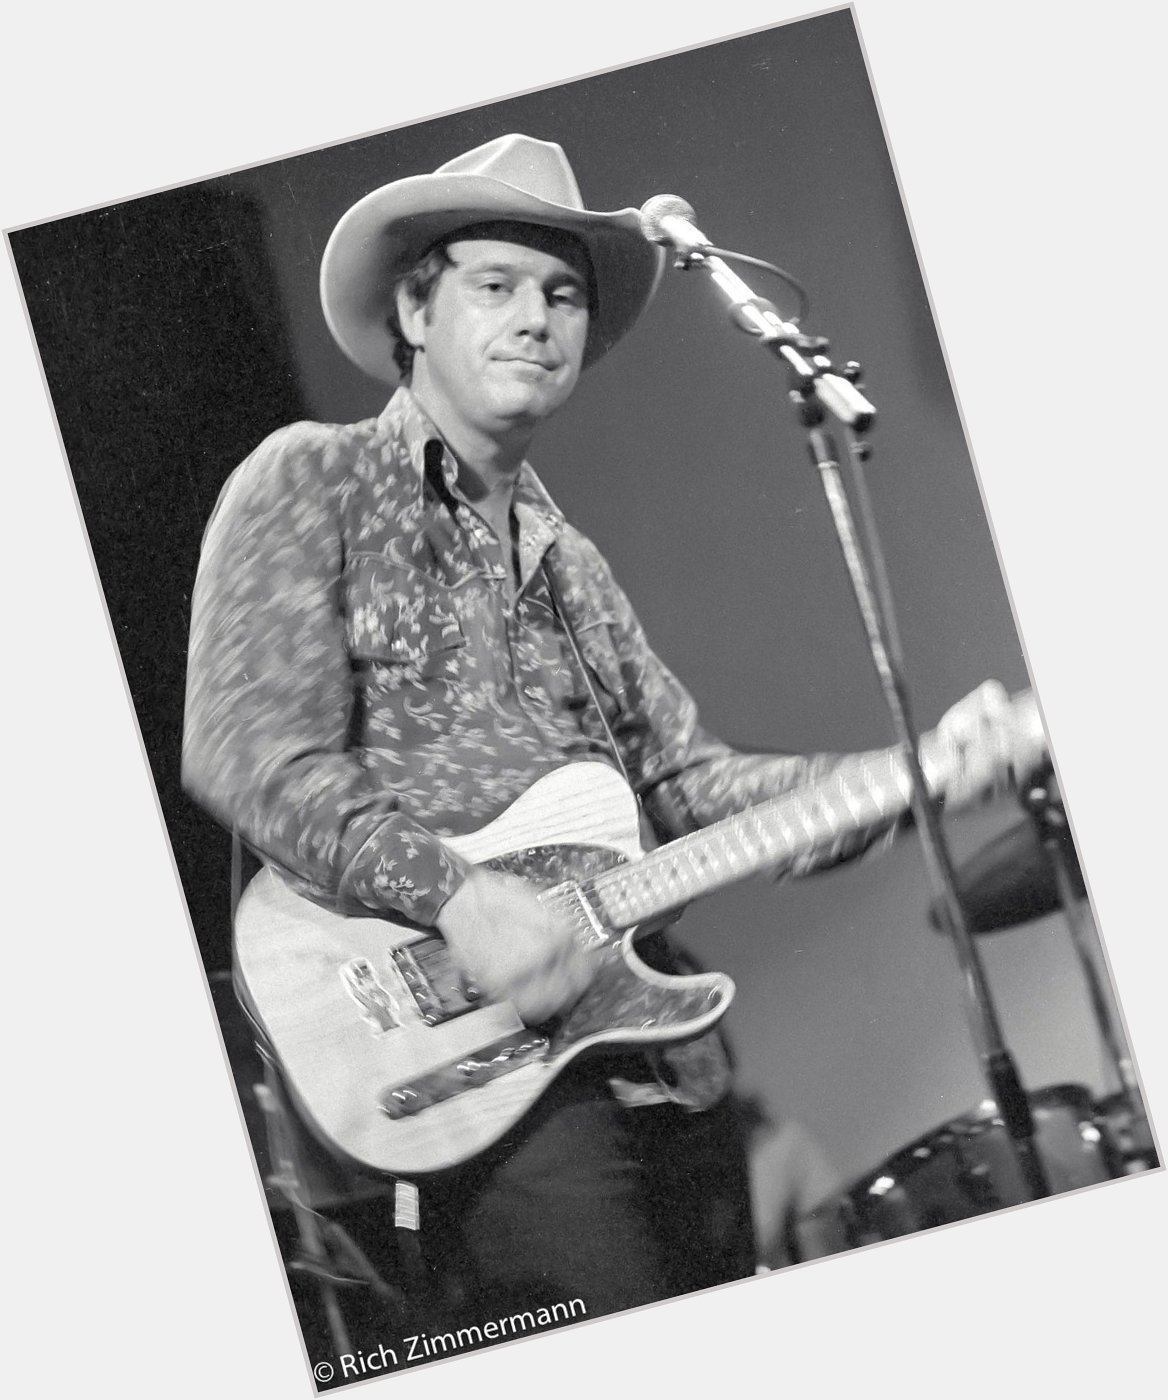 Happy birthday to Jerry Jeff Walker!!
Here at the Amazing Grace in Chicago just a few years ago in 1975. 